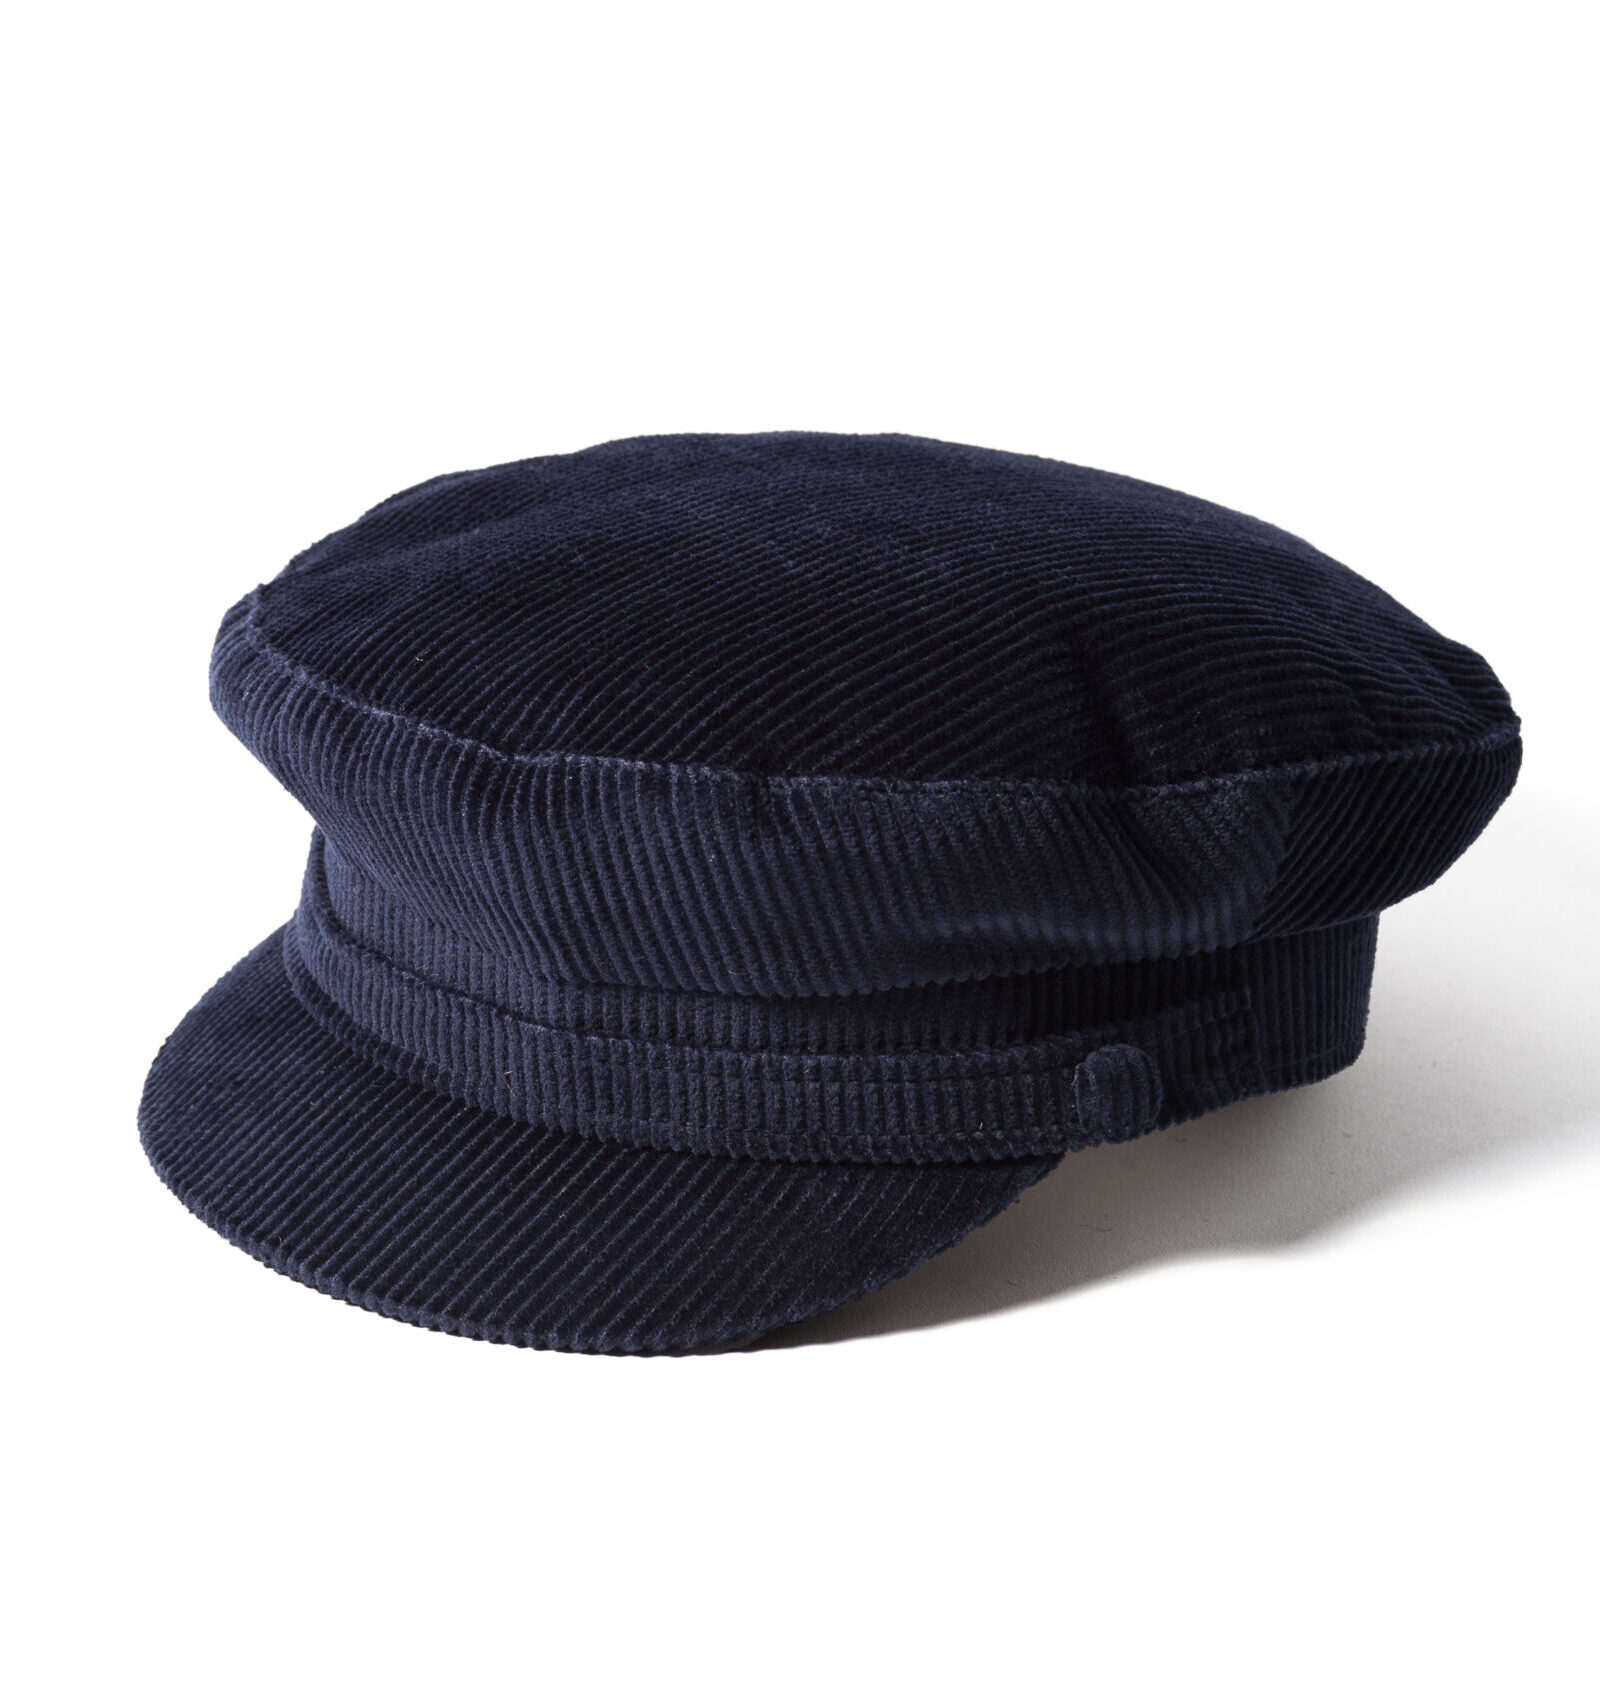 CORDUROY BARGEE MARINER CAP - Cain of Heswall